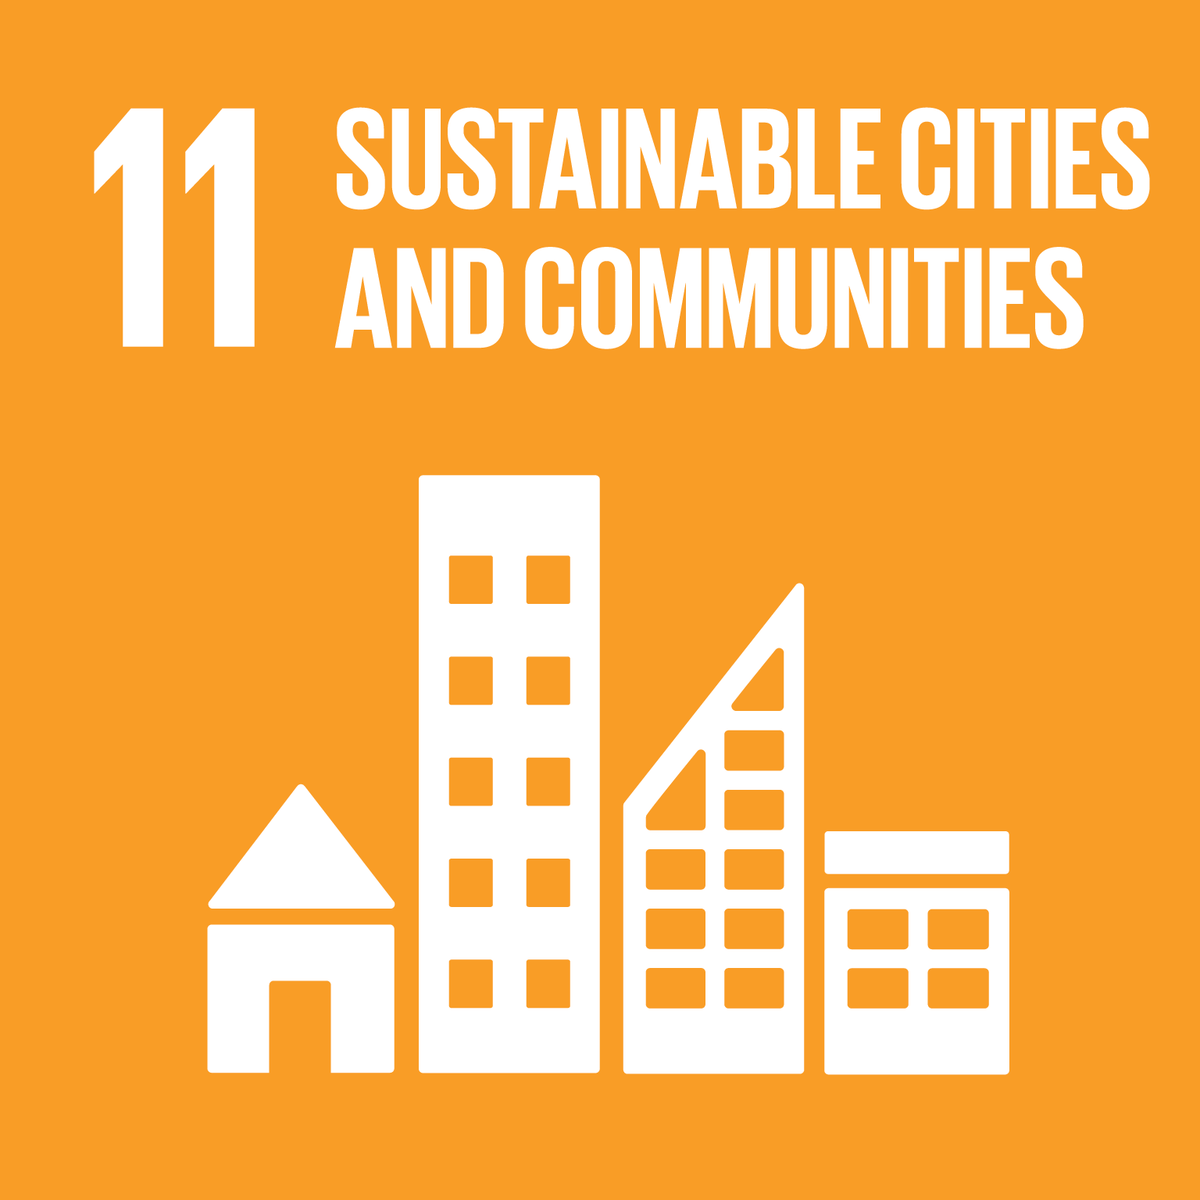 File:Sustainable Development Goal 11.png - Wikimedia Commons